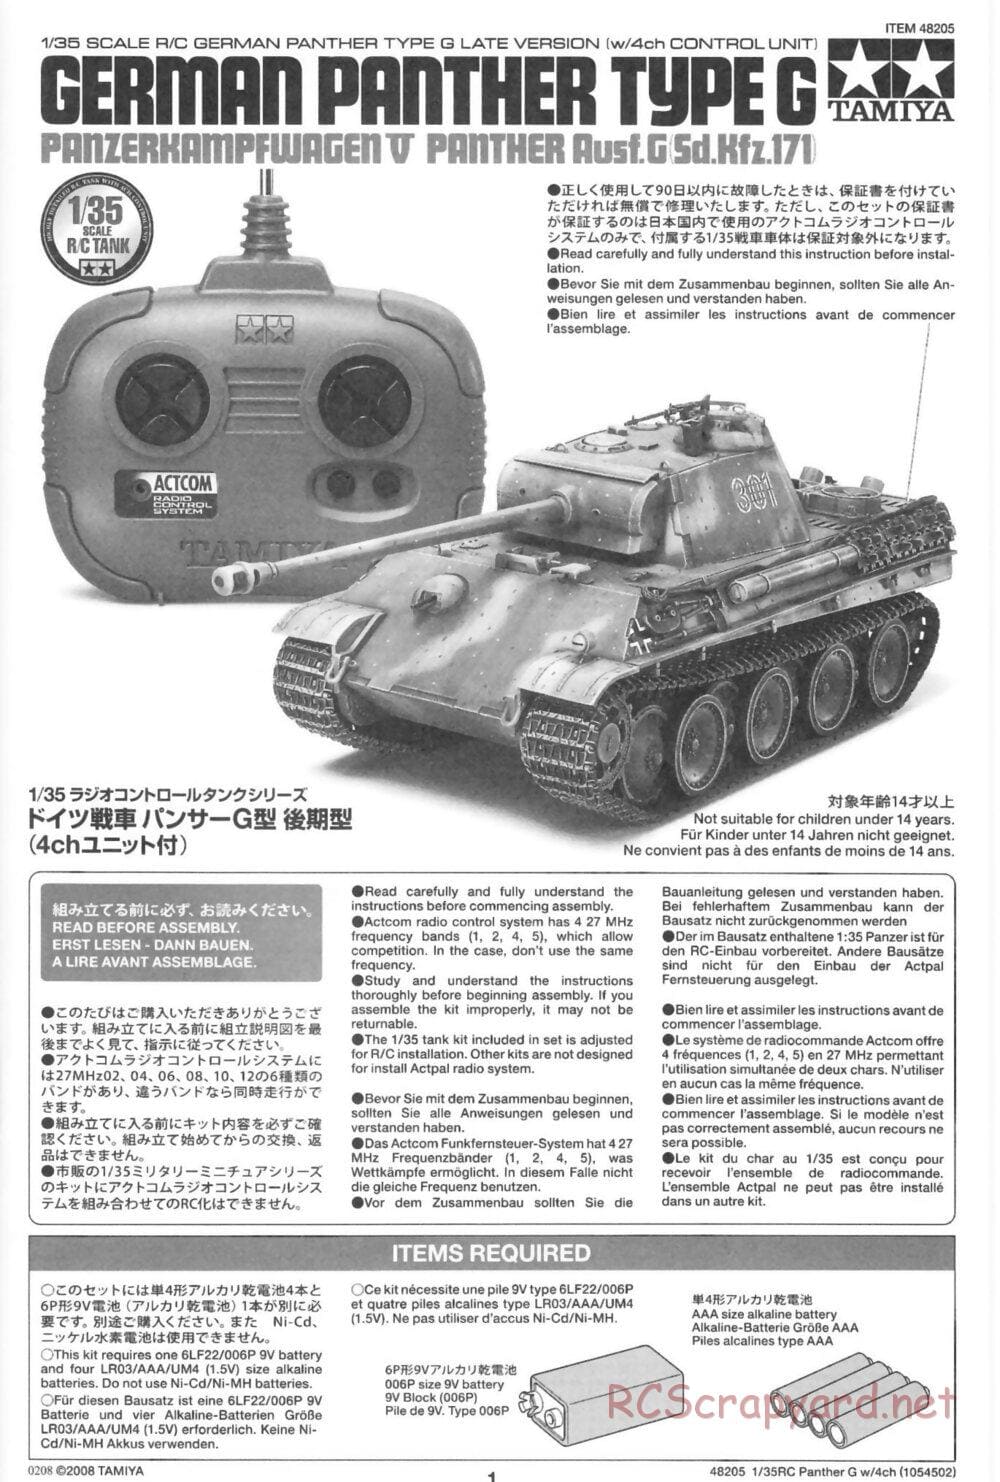 Tamiya - German Panther Type G - 1/35 Scale Chassis - Manual - Page 1